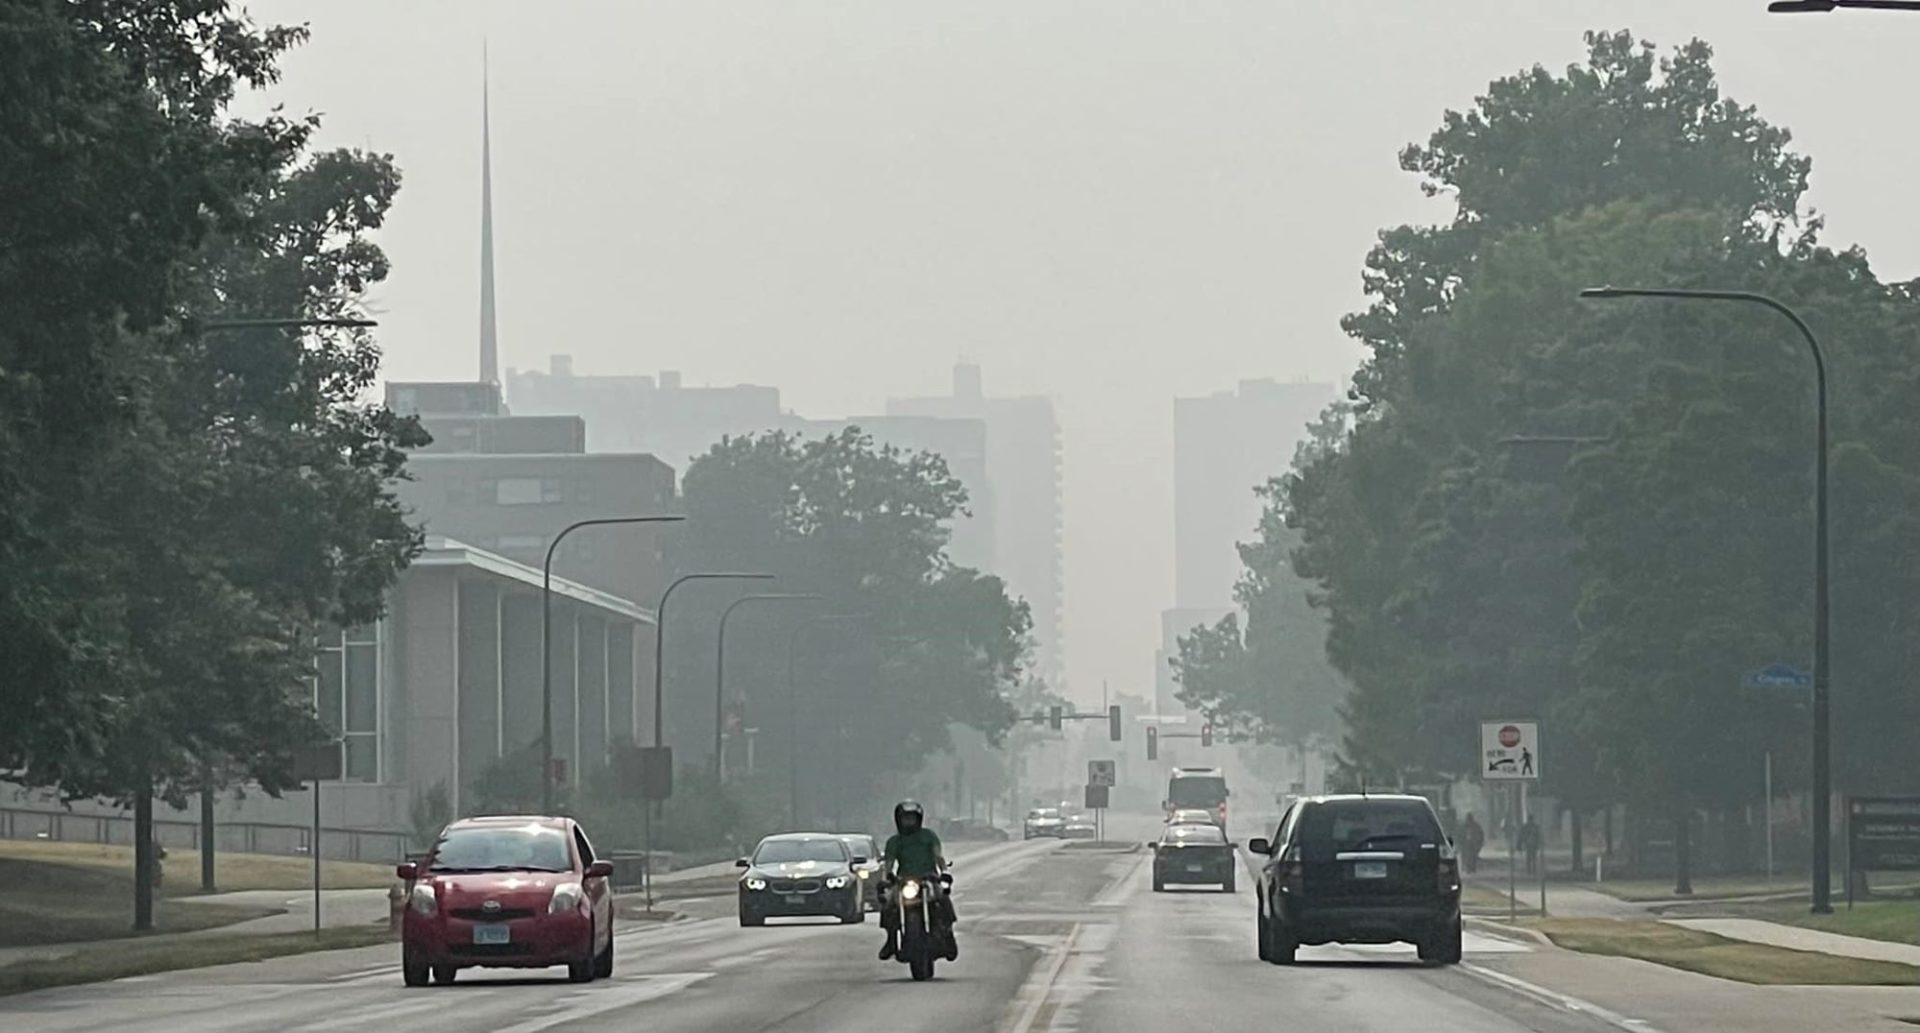 View down a campus street with buildings and trees lining the road. There are cars traveling in each direction. The air is gray and very hazy.